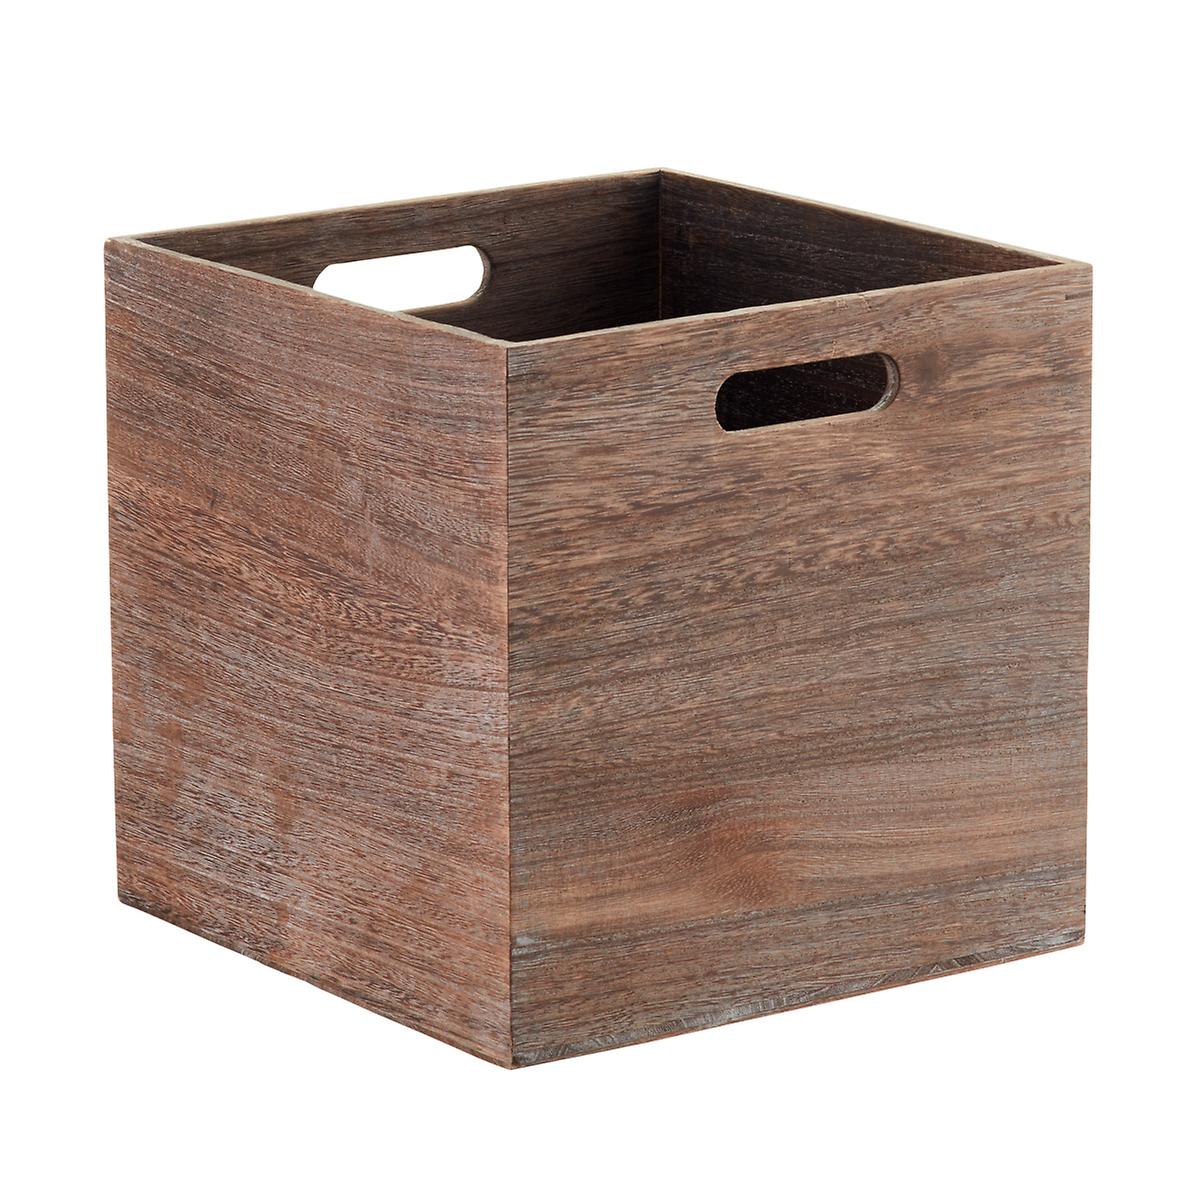 Feathergrain Wooden Storage Cubes With Handles The Container Store